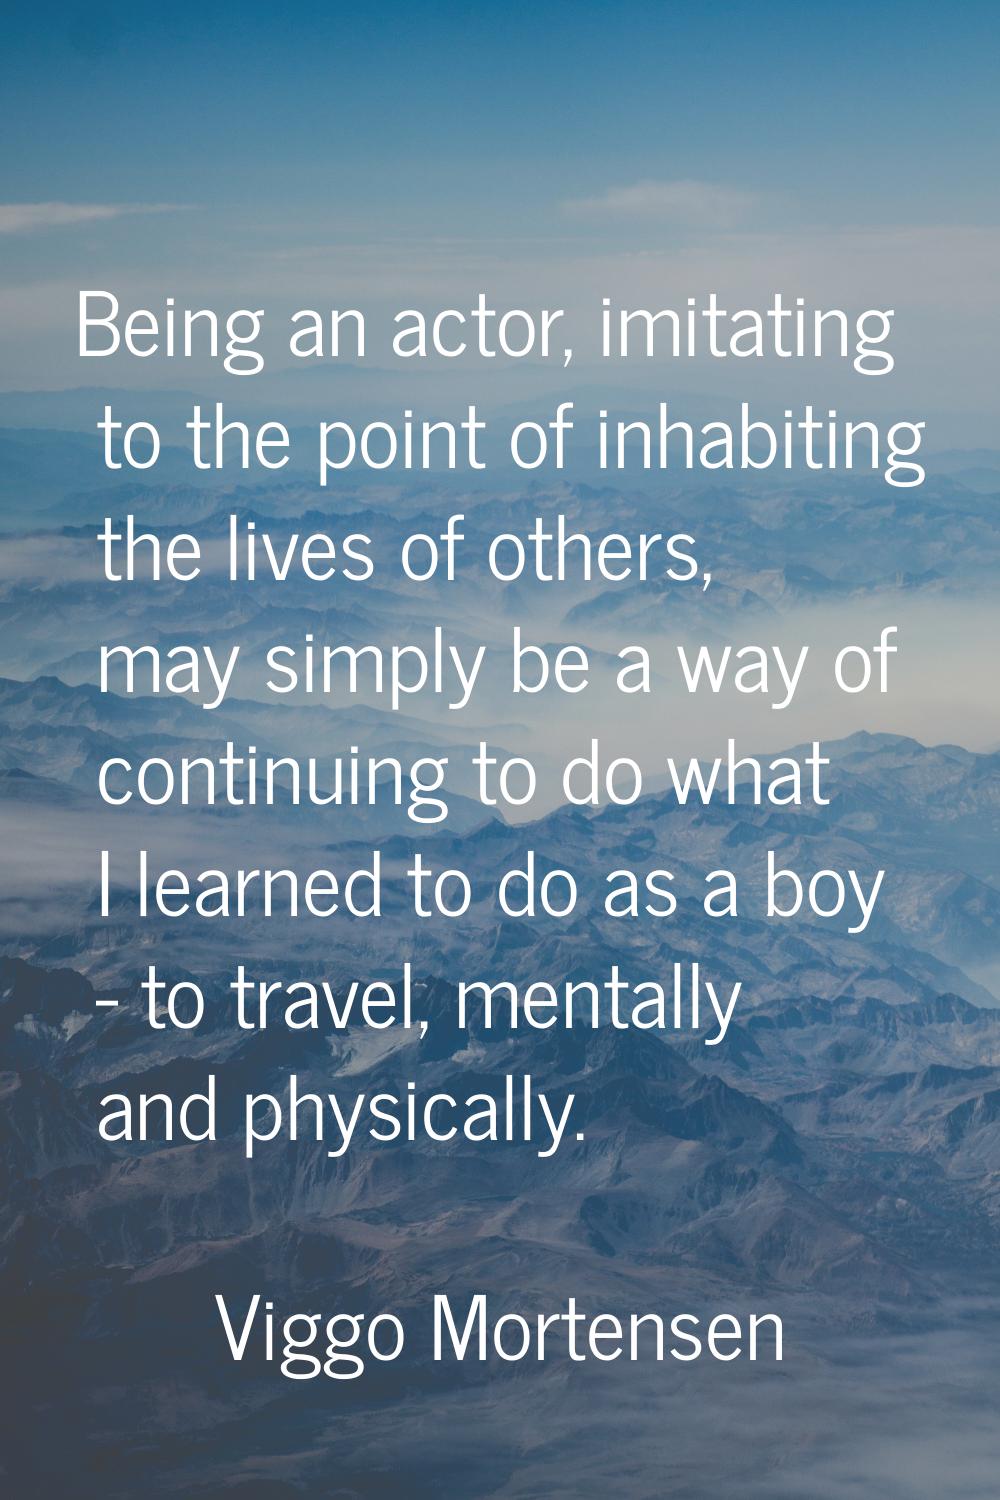 Being an actor, imitating to the point of inhabiting the lives of others, may simply be a way of co